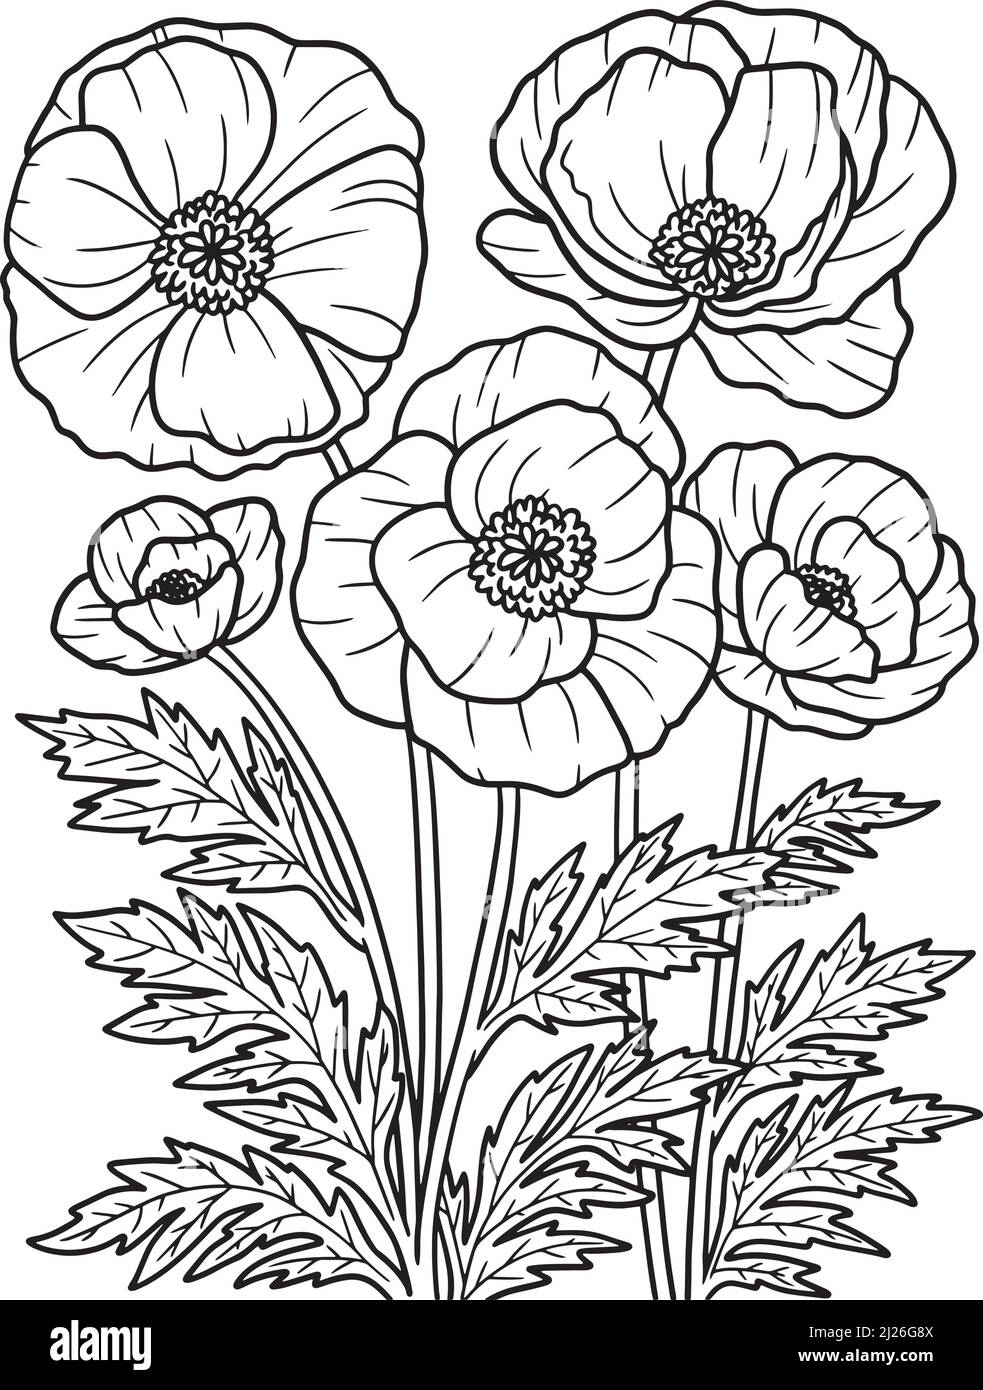 Corn Poppy Flower Coloring Page for Adults Stock Vector